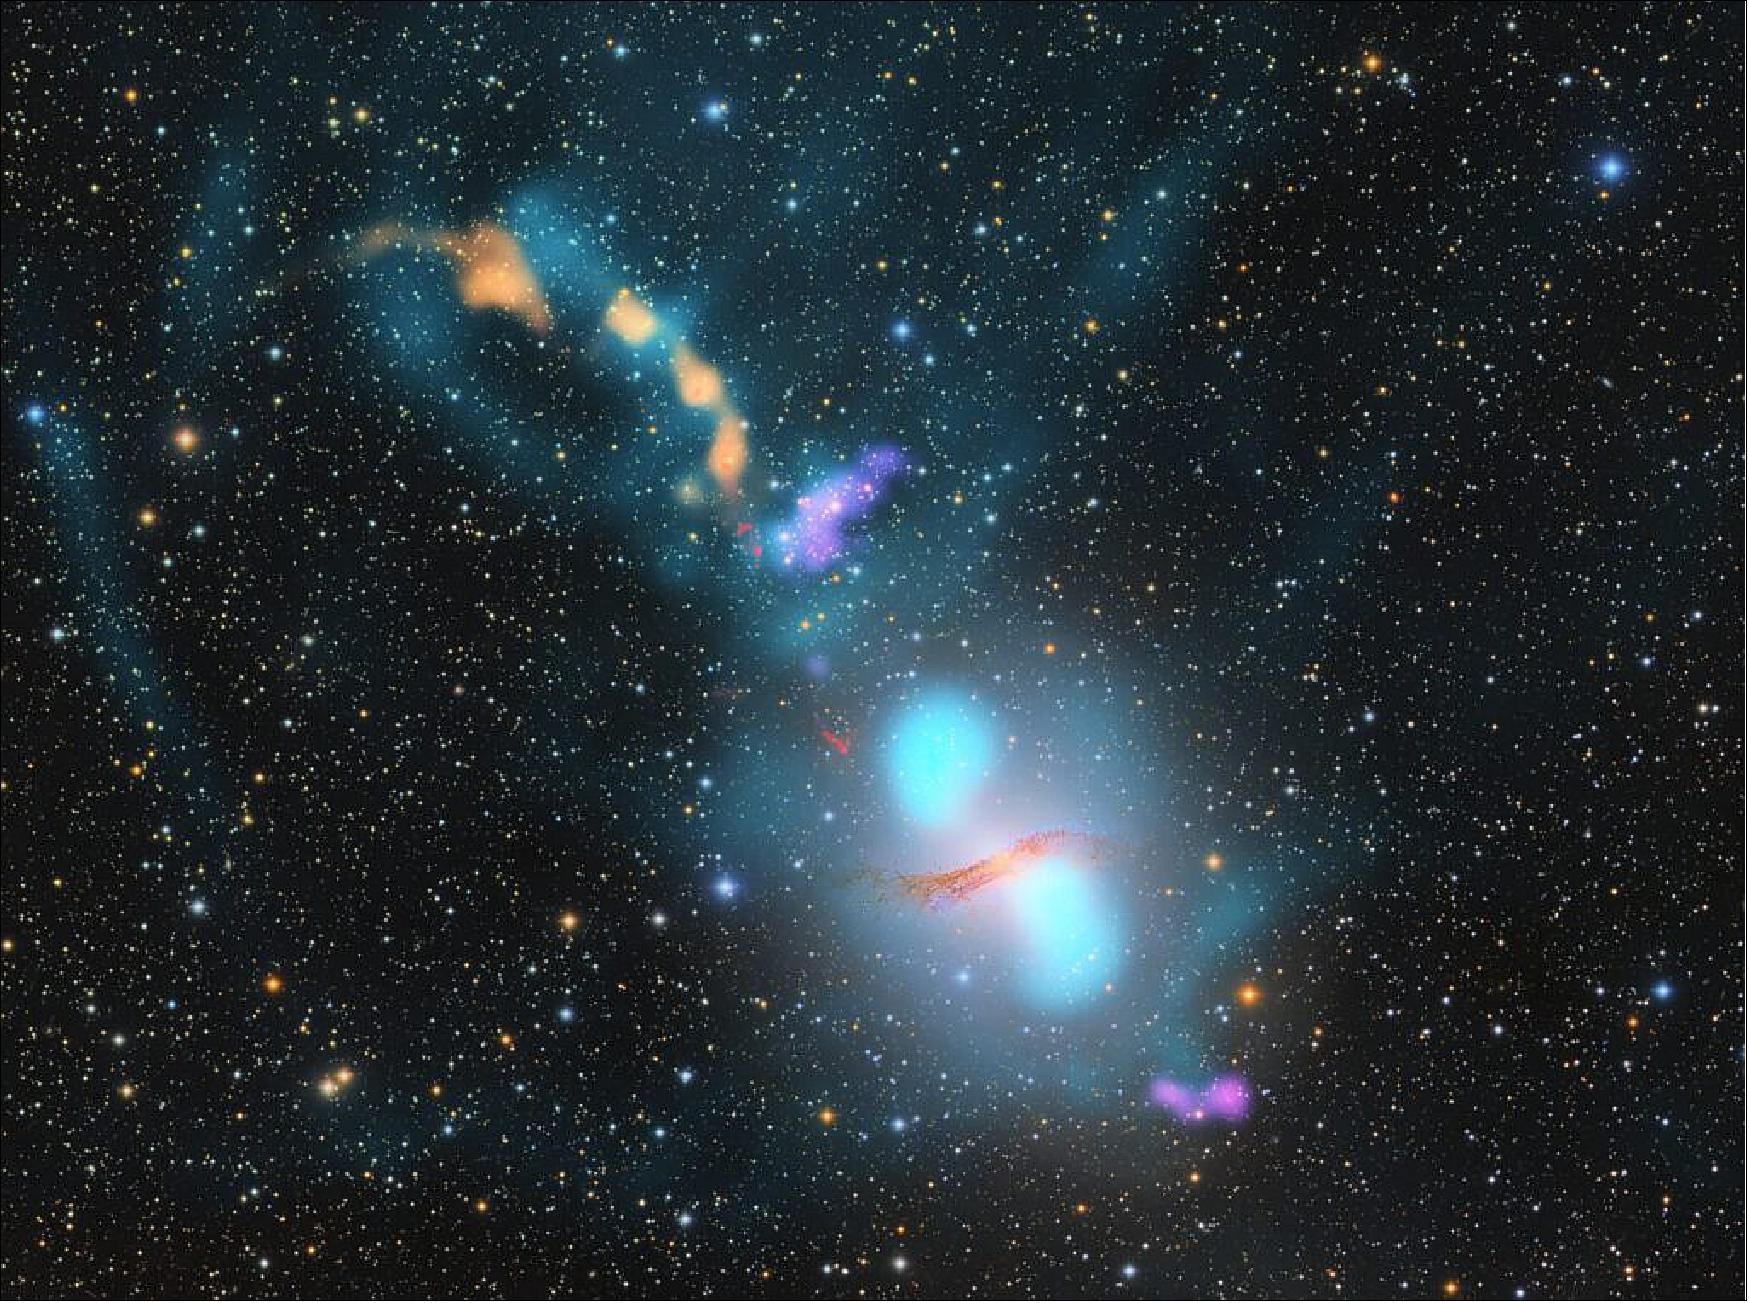 Figure 37: Centaurus A is a giant elliptical active galaxy 12 million light-years away. At its heart lies a black hole with a mass of 55 million suns. This composite image shows the galaxy and the surrounding intergalactic space at several different wavelengths. The radio plasma is displayed in blue and appears to be interacting with hot X-ray emitting gas (orange) and cold neutral hydrogen (purple). Clouds emitting Halpha (red) are also shown above the main optical part of the galaxy which lies in between the two brightest radio blobs. The ‘background’ is at optical wavelengths, showing stars in our own Milky Way that are actually in the foreground [image credit: Connor Matherne, Louisiana State University (Optical/Halpha), Kraft et al. (X-ray), Struve et al. (HI), Ben McKinley, ICRAR/Curtin. (Radio)]